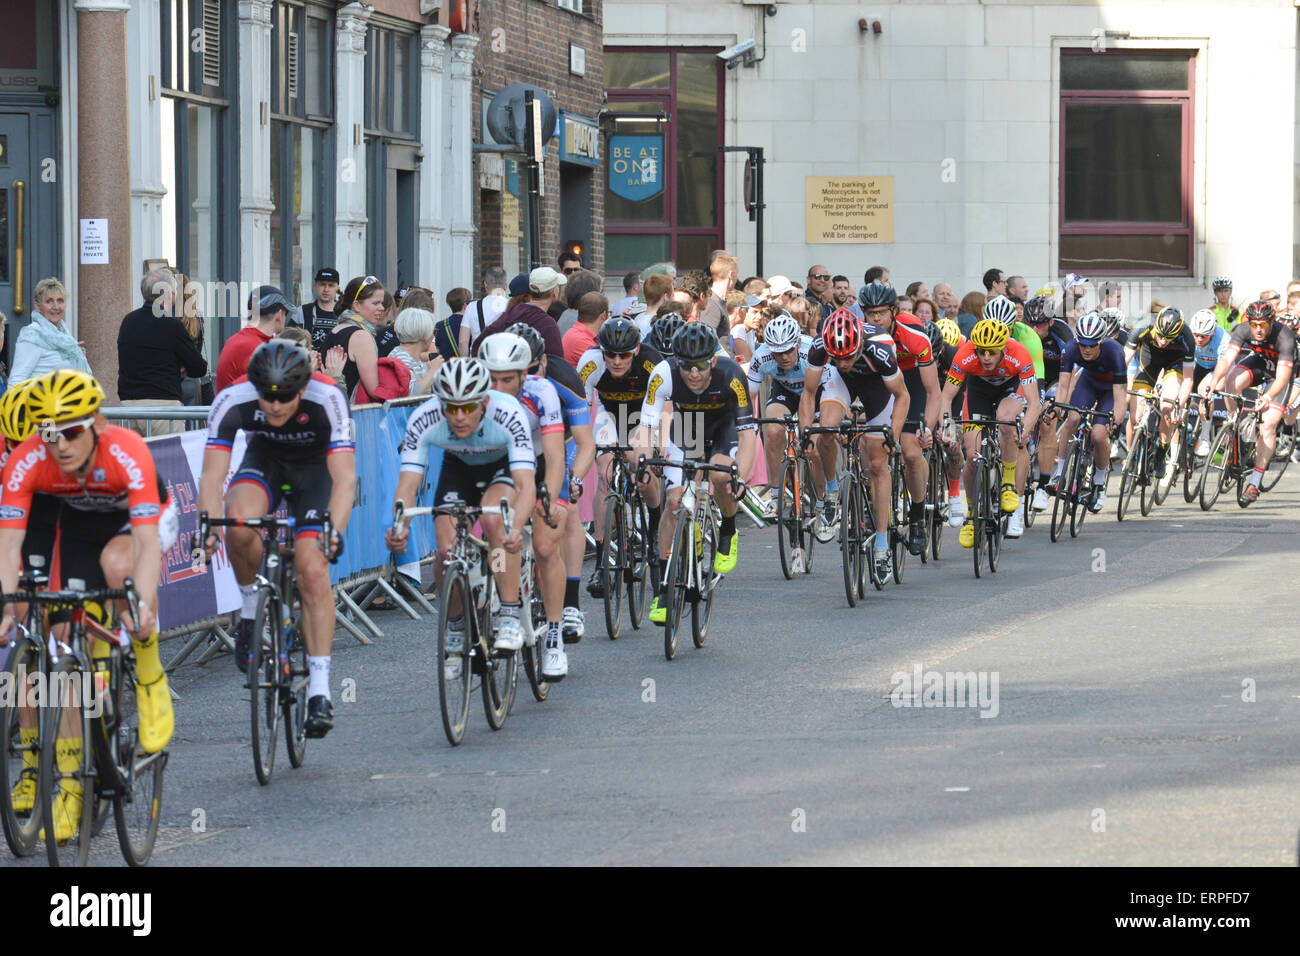 The Jupiter Nocturne cycle races around the Smithfield Market race circuit in London. Stock Photo